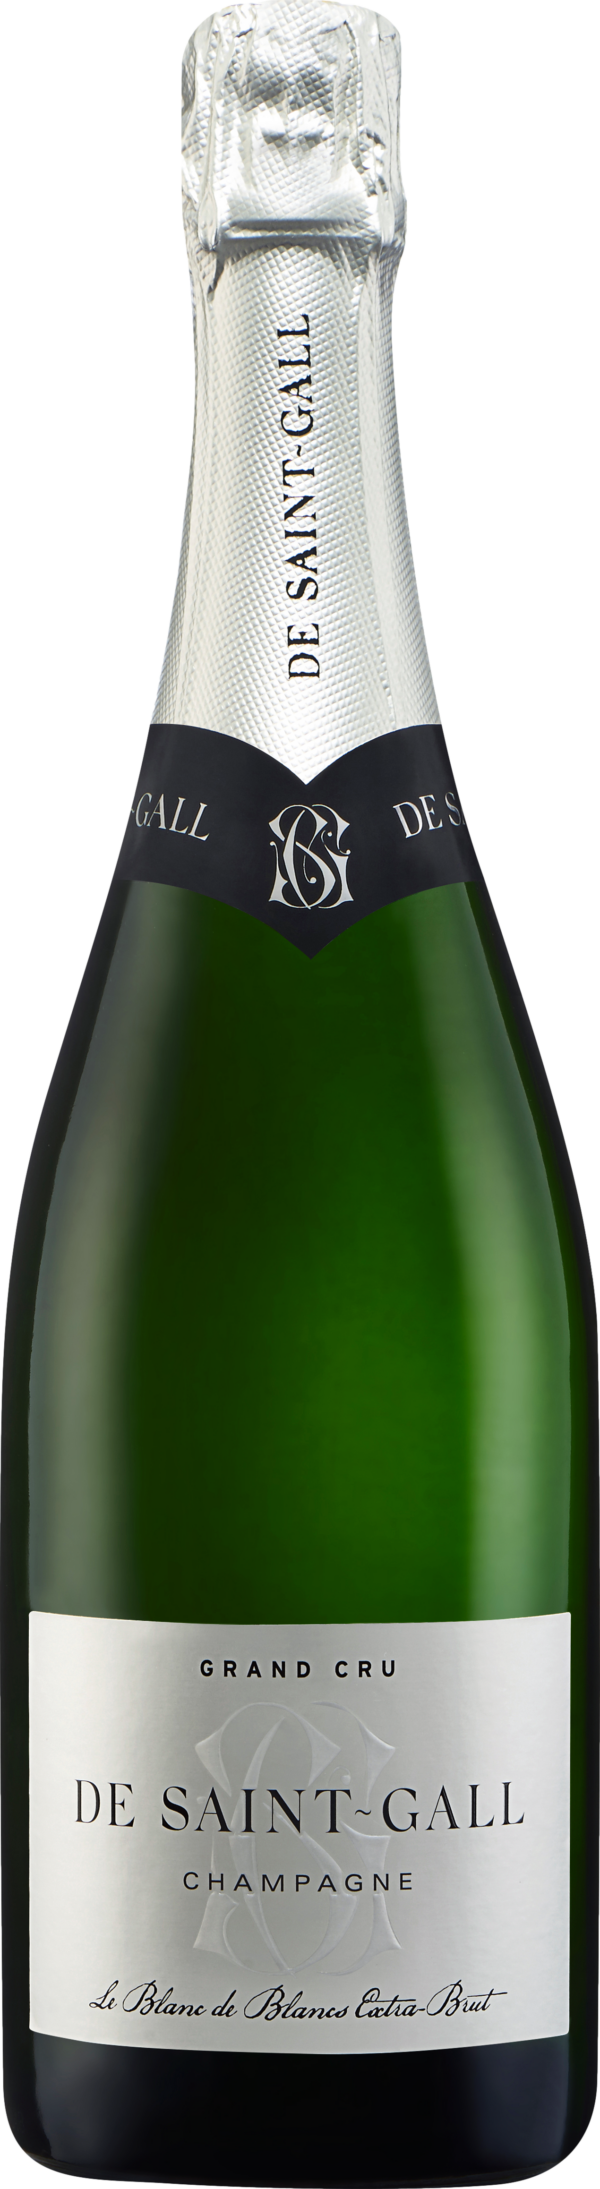 Product image of Champagne De Saint Gall Blanc de Blancs Grand Cru Extra Brut from 8wines